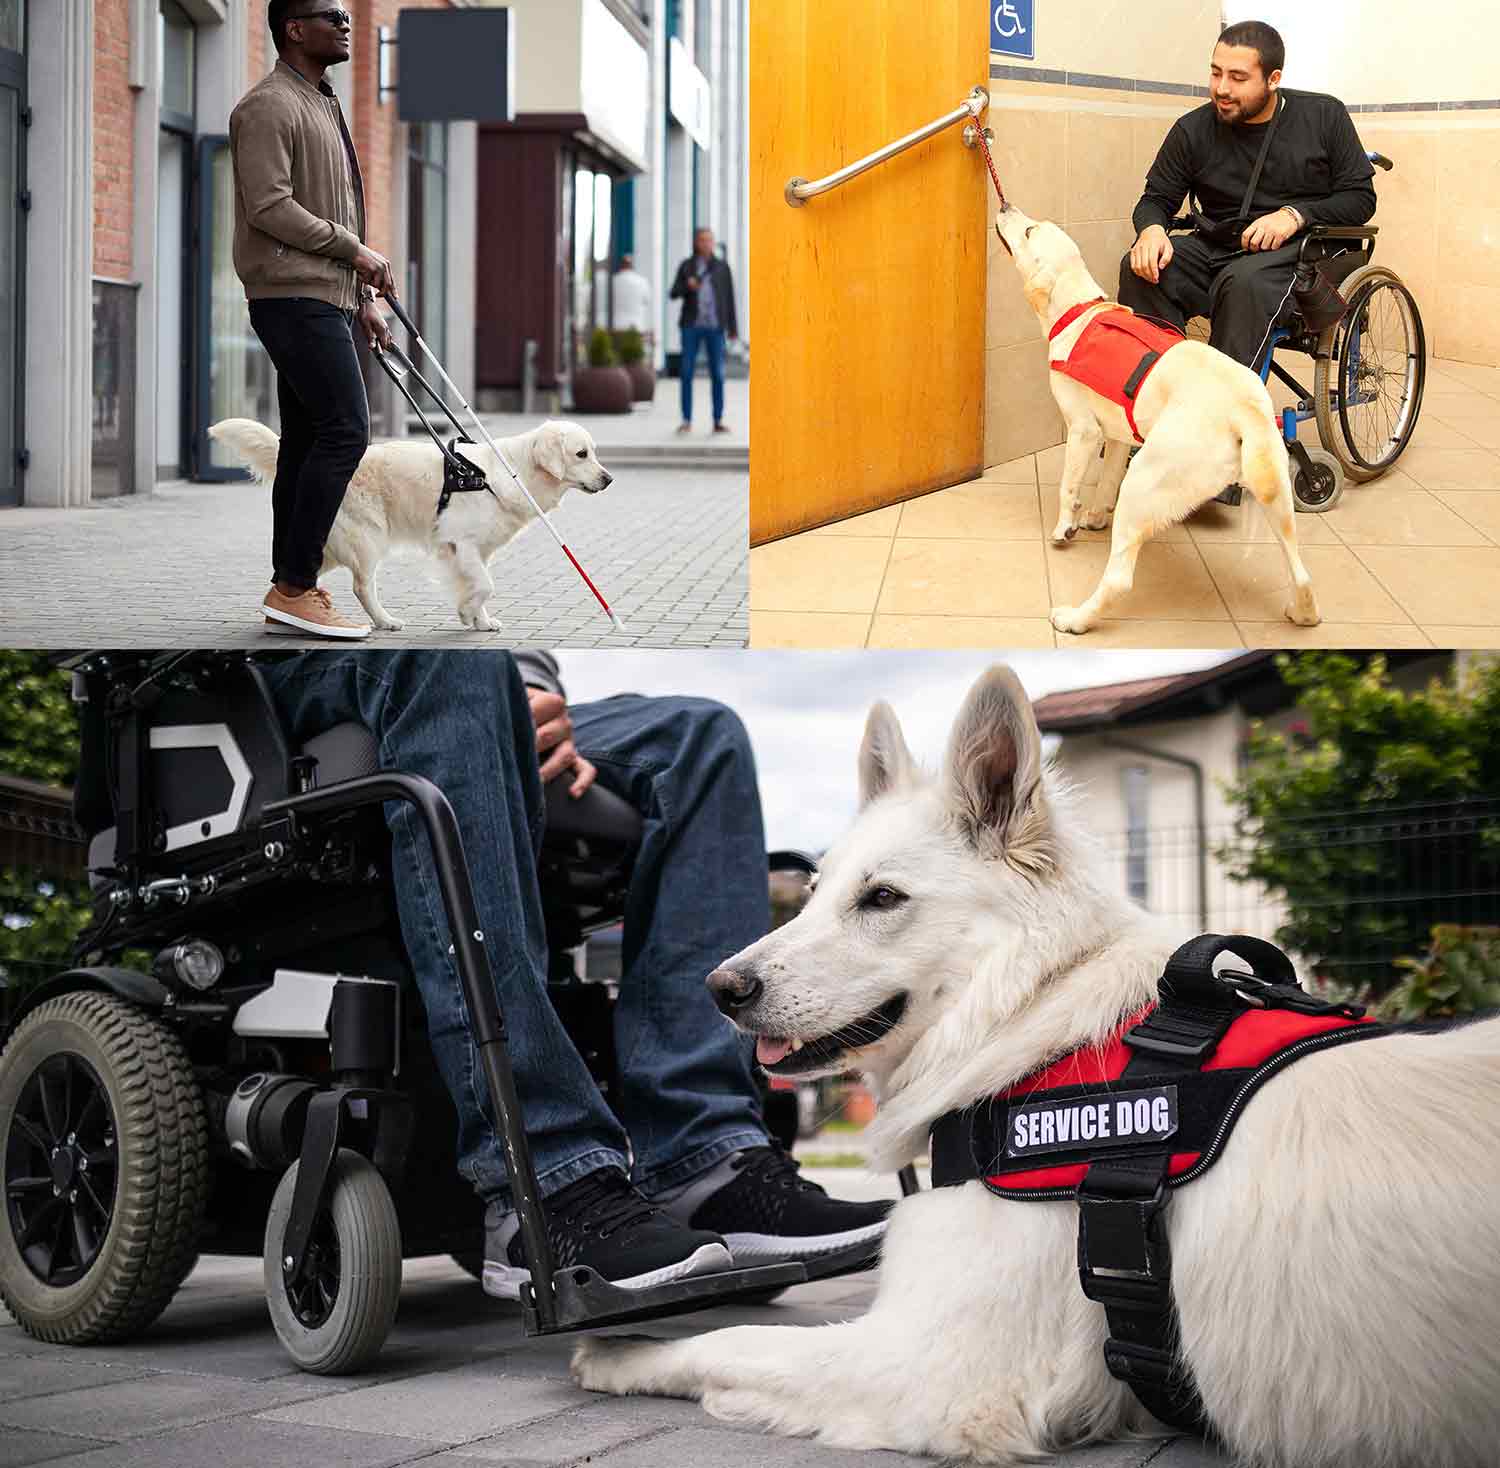 Three panels showing a dog leading a blind man on a sidewalk, a dog pulling a door closed for a man using a wheelchair, and a dog lying at the feet of a wheelchair user.